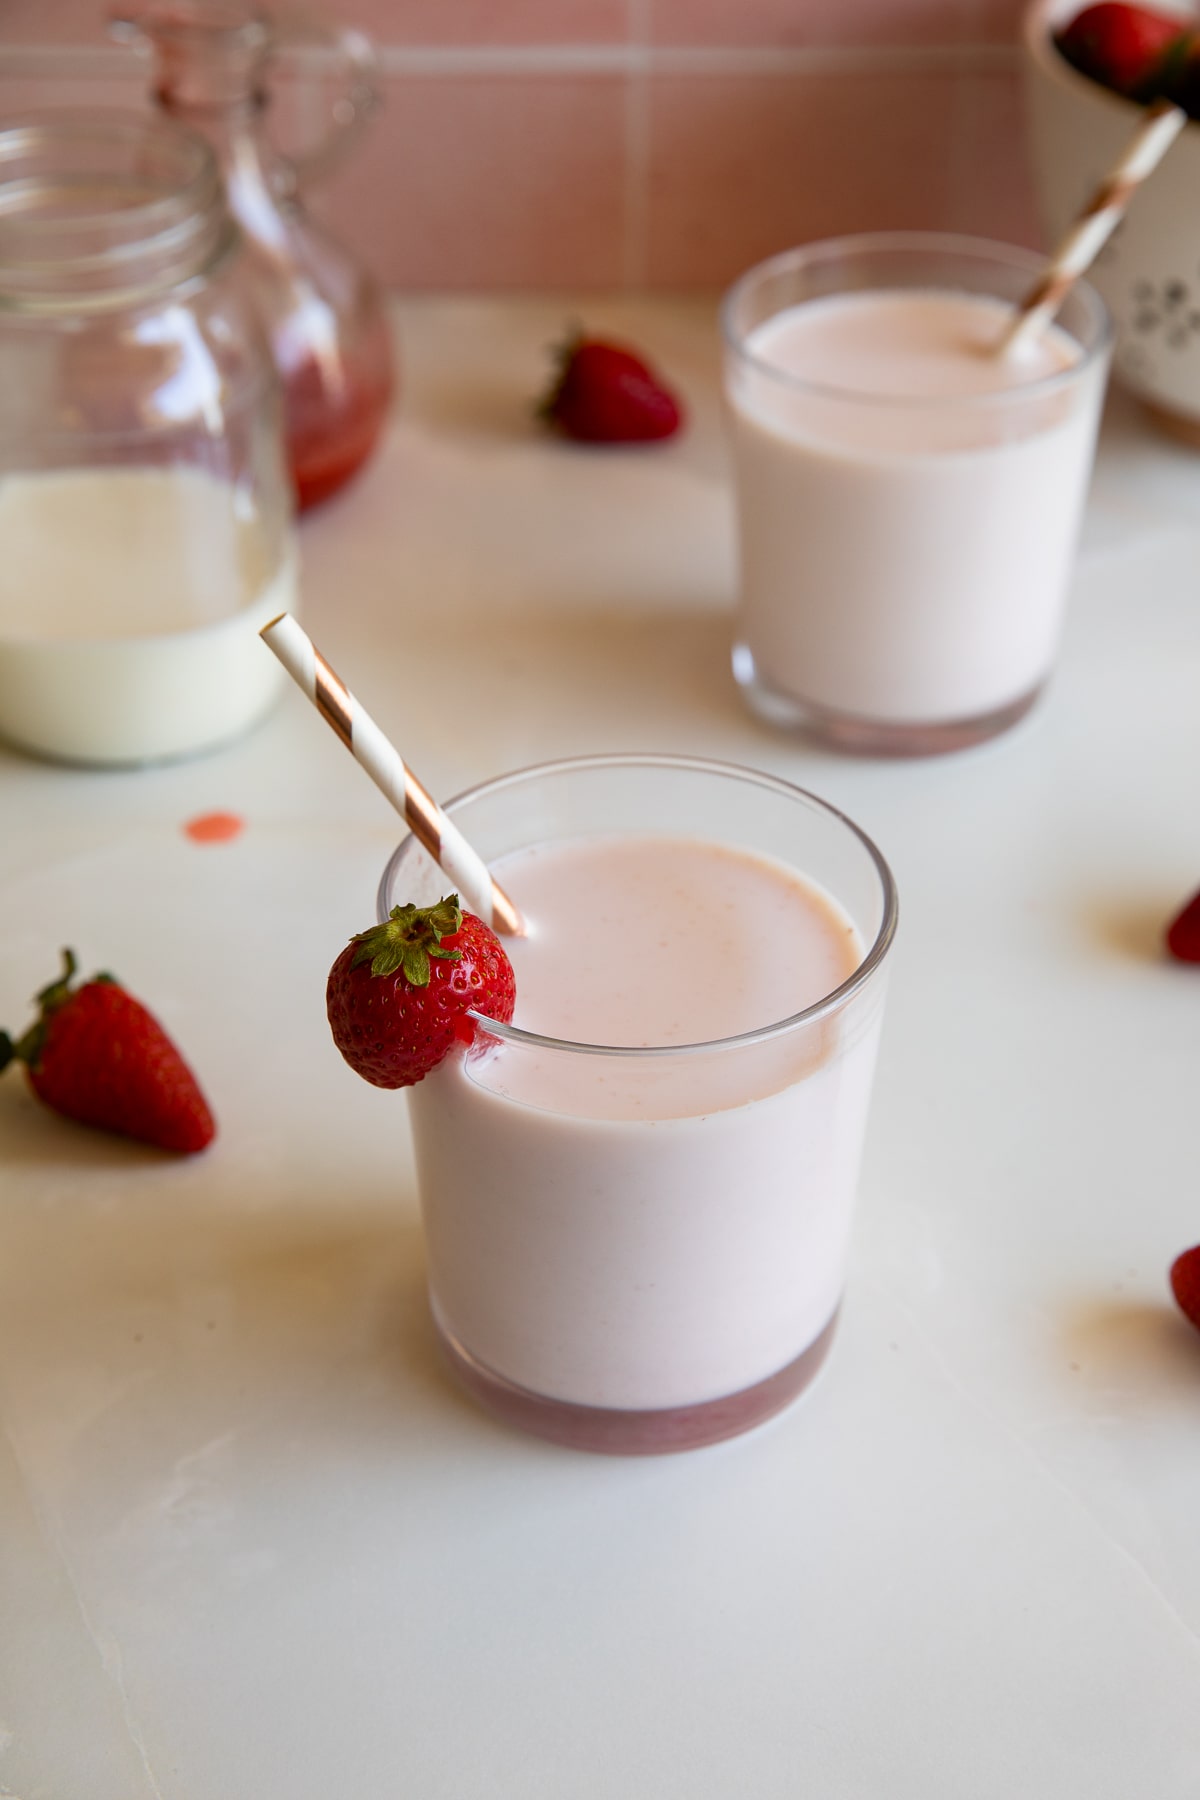 strawberry milk in glass with strawberries and straw.